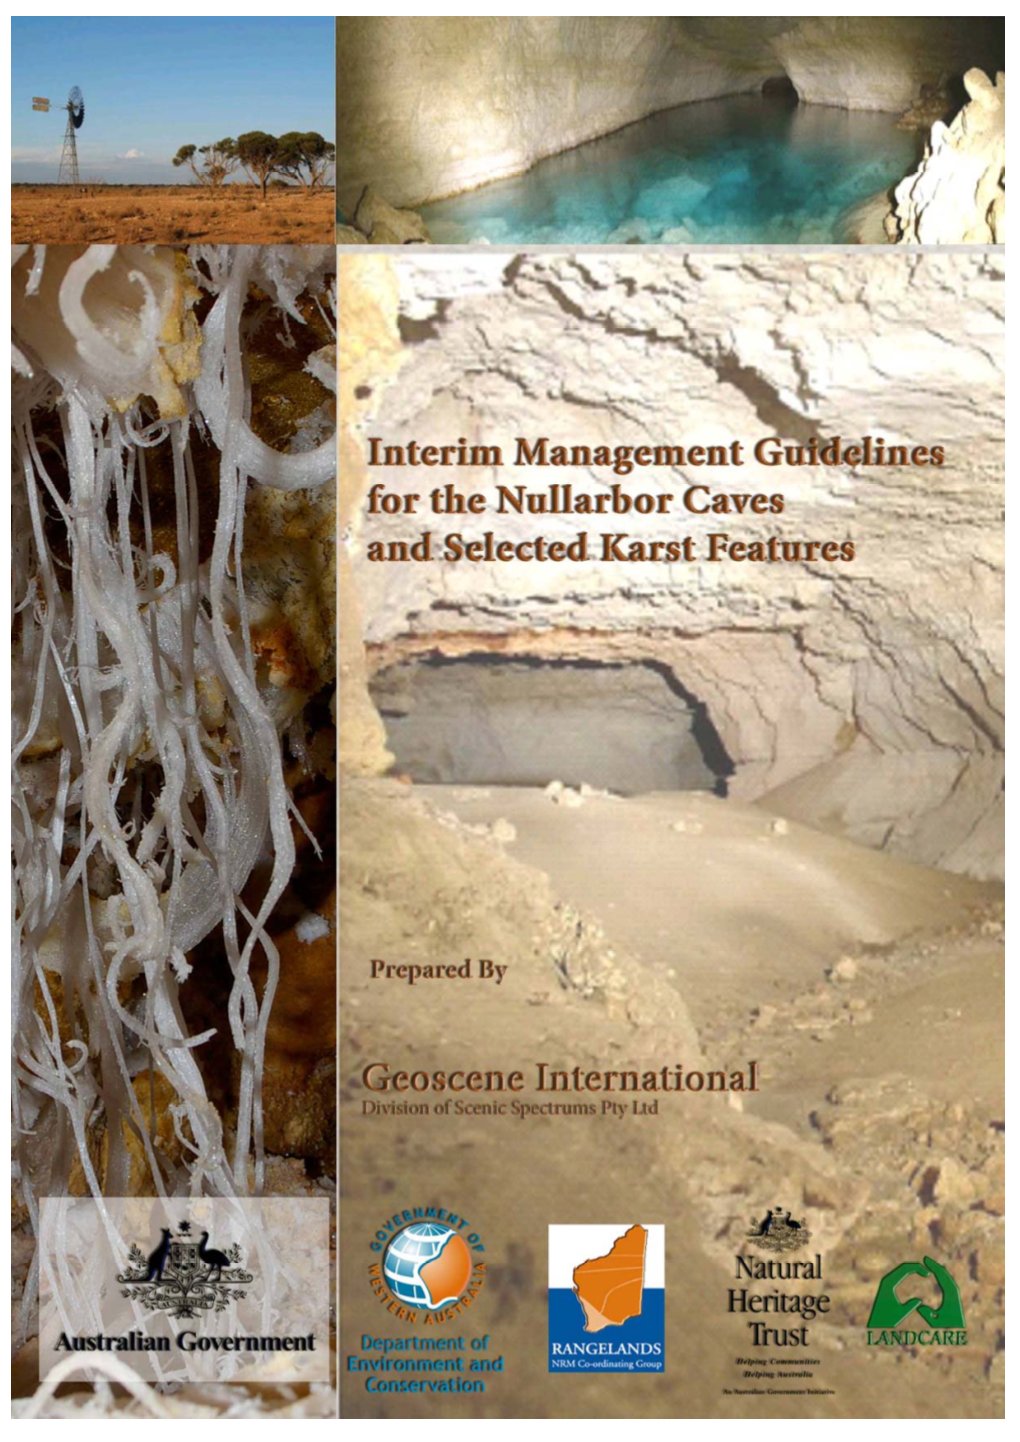 Interim Management Guidelines for the Nullarbor Caves and Selected Karst Features